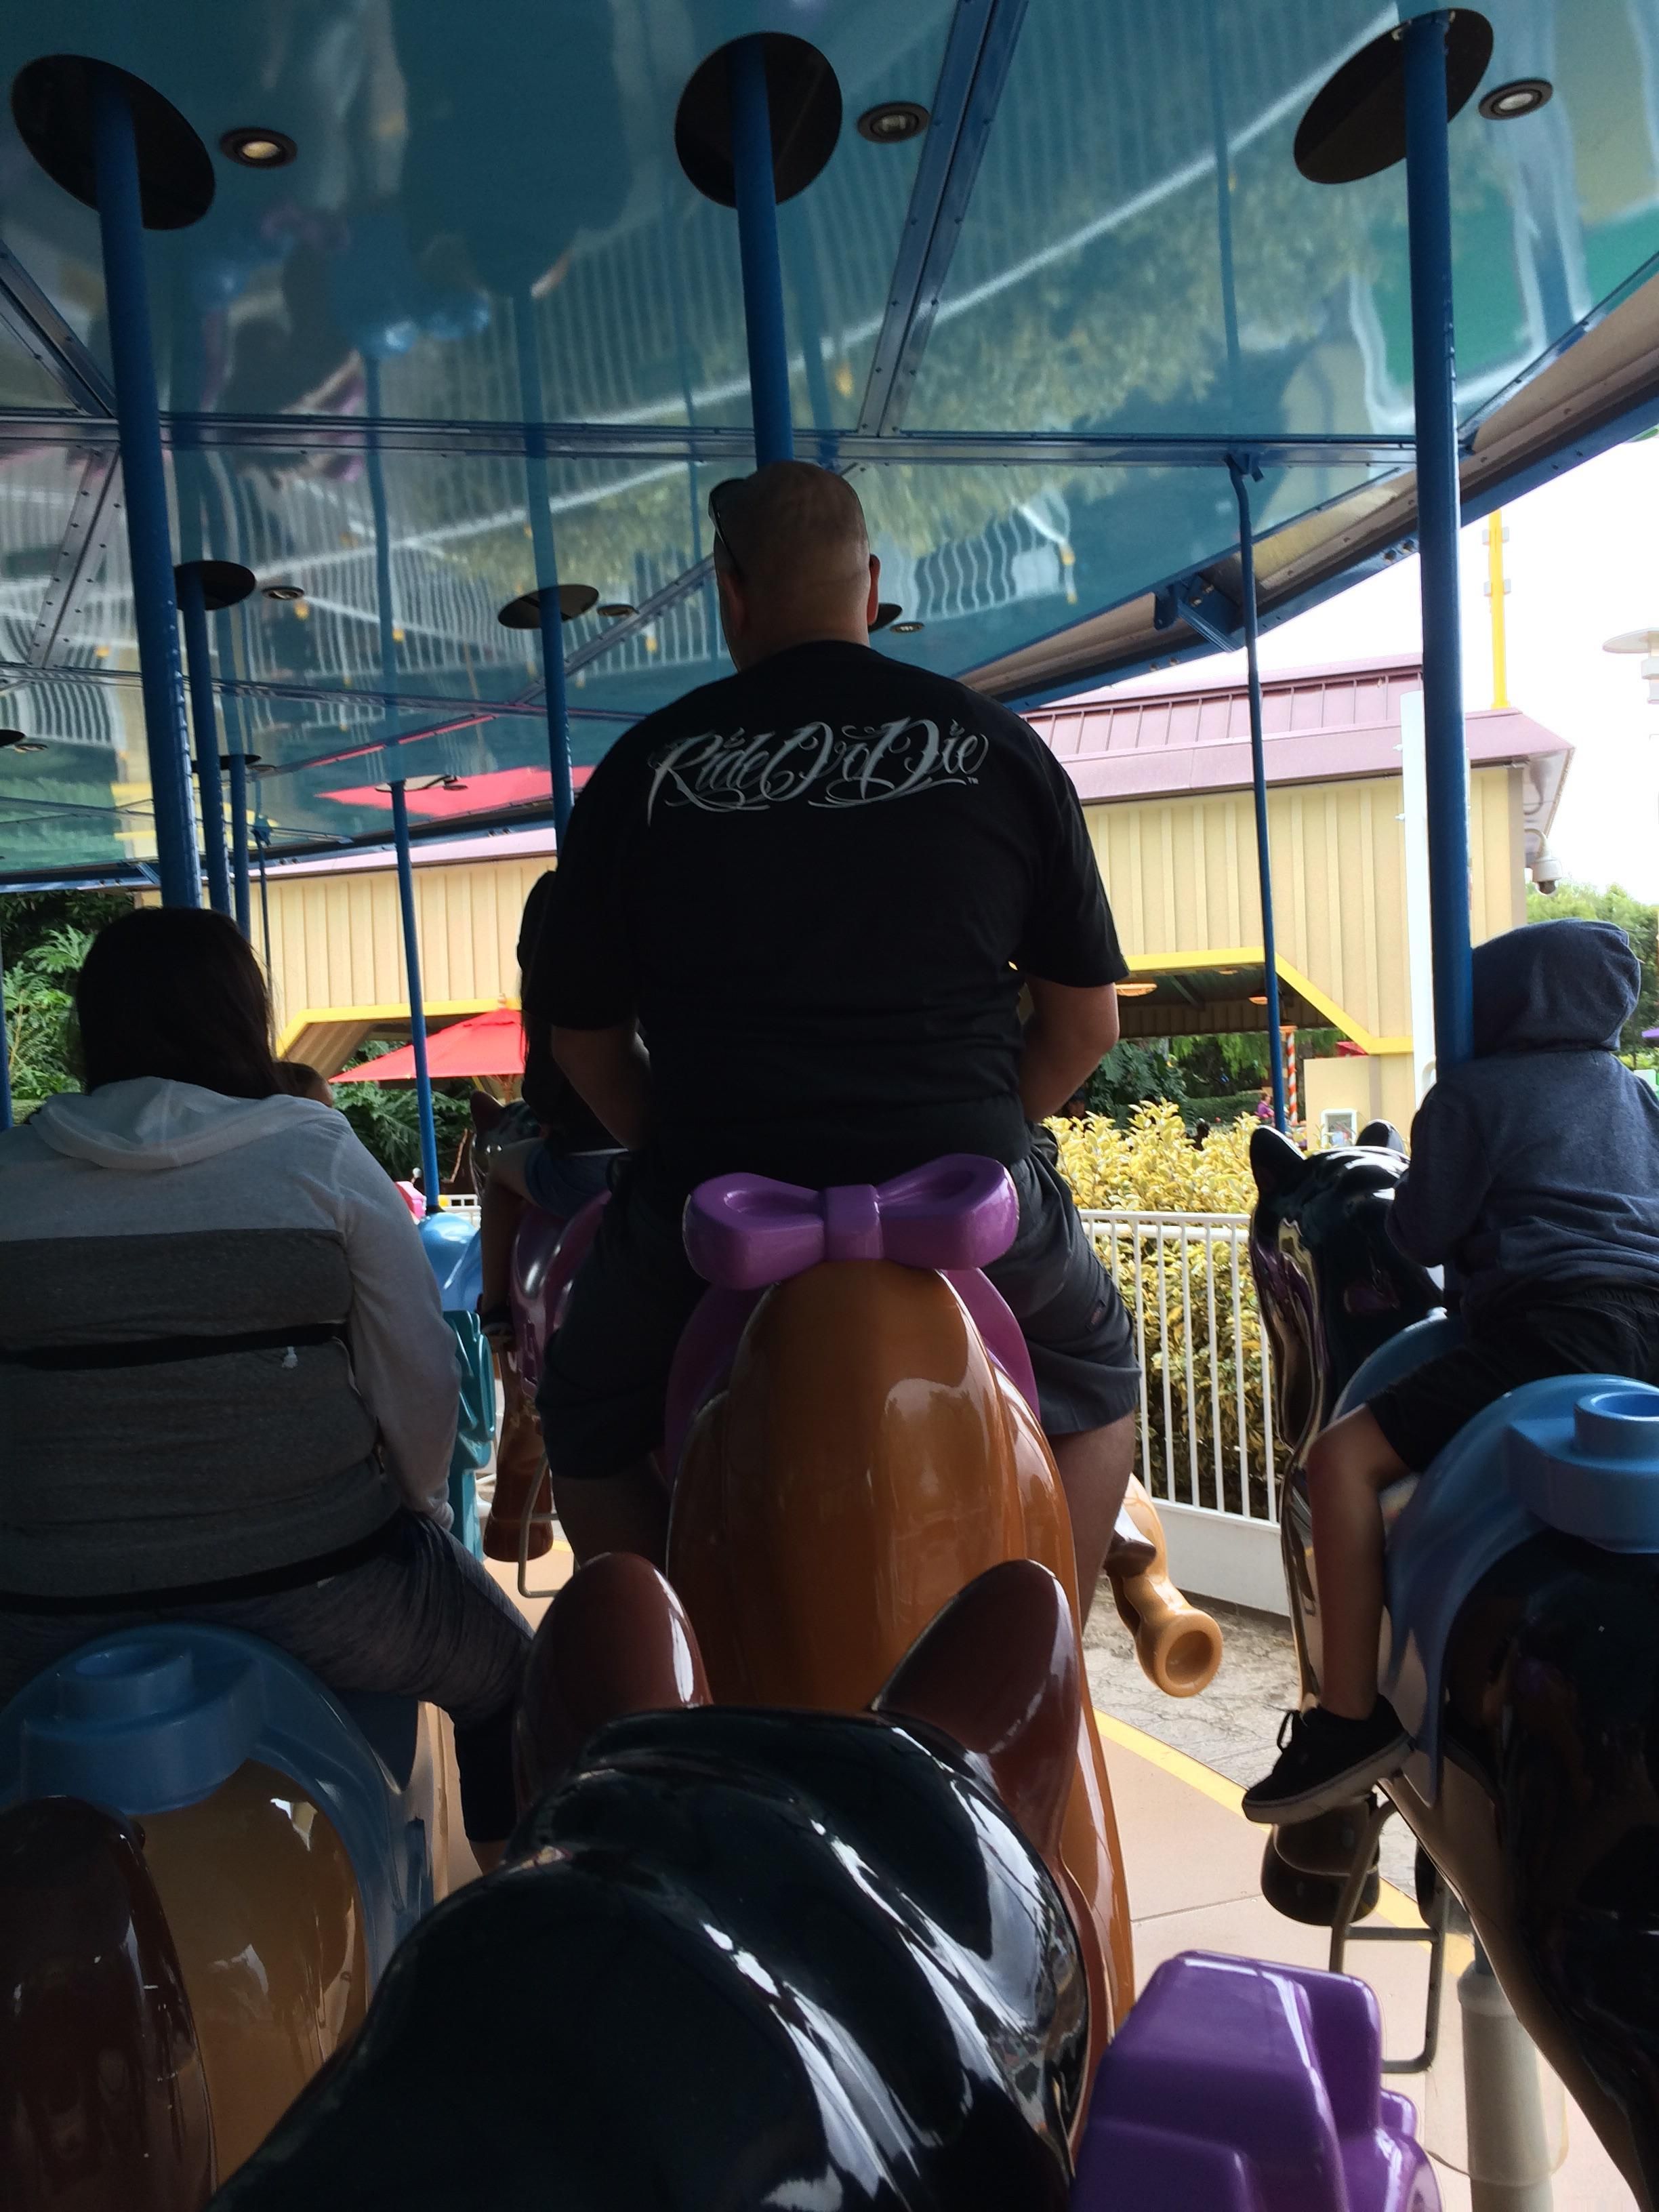 Dude in front of us on the carousel at Legoland was hardcore